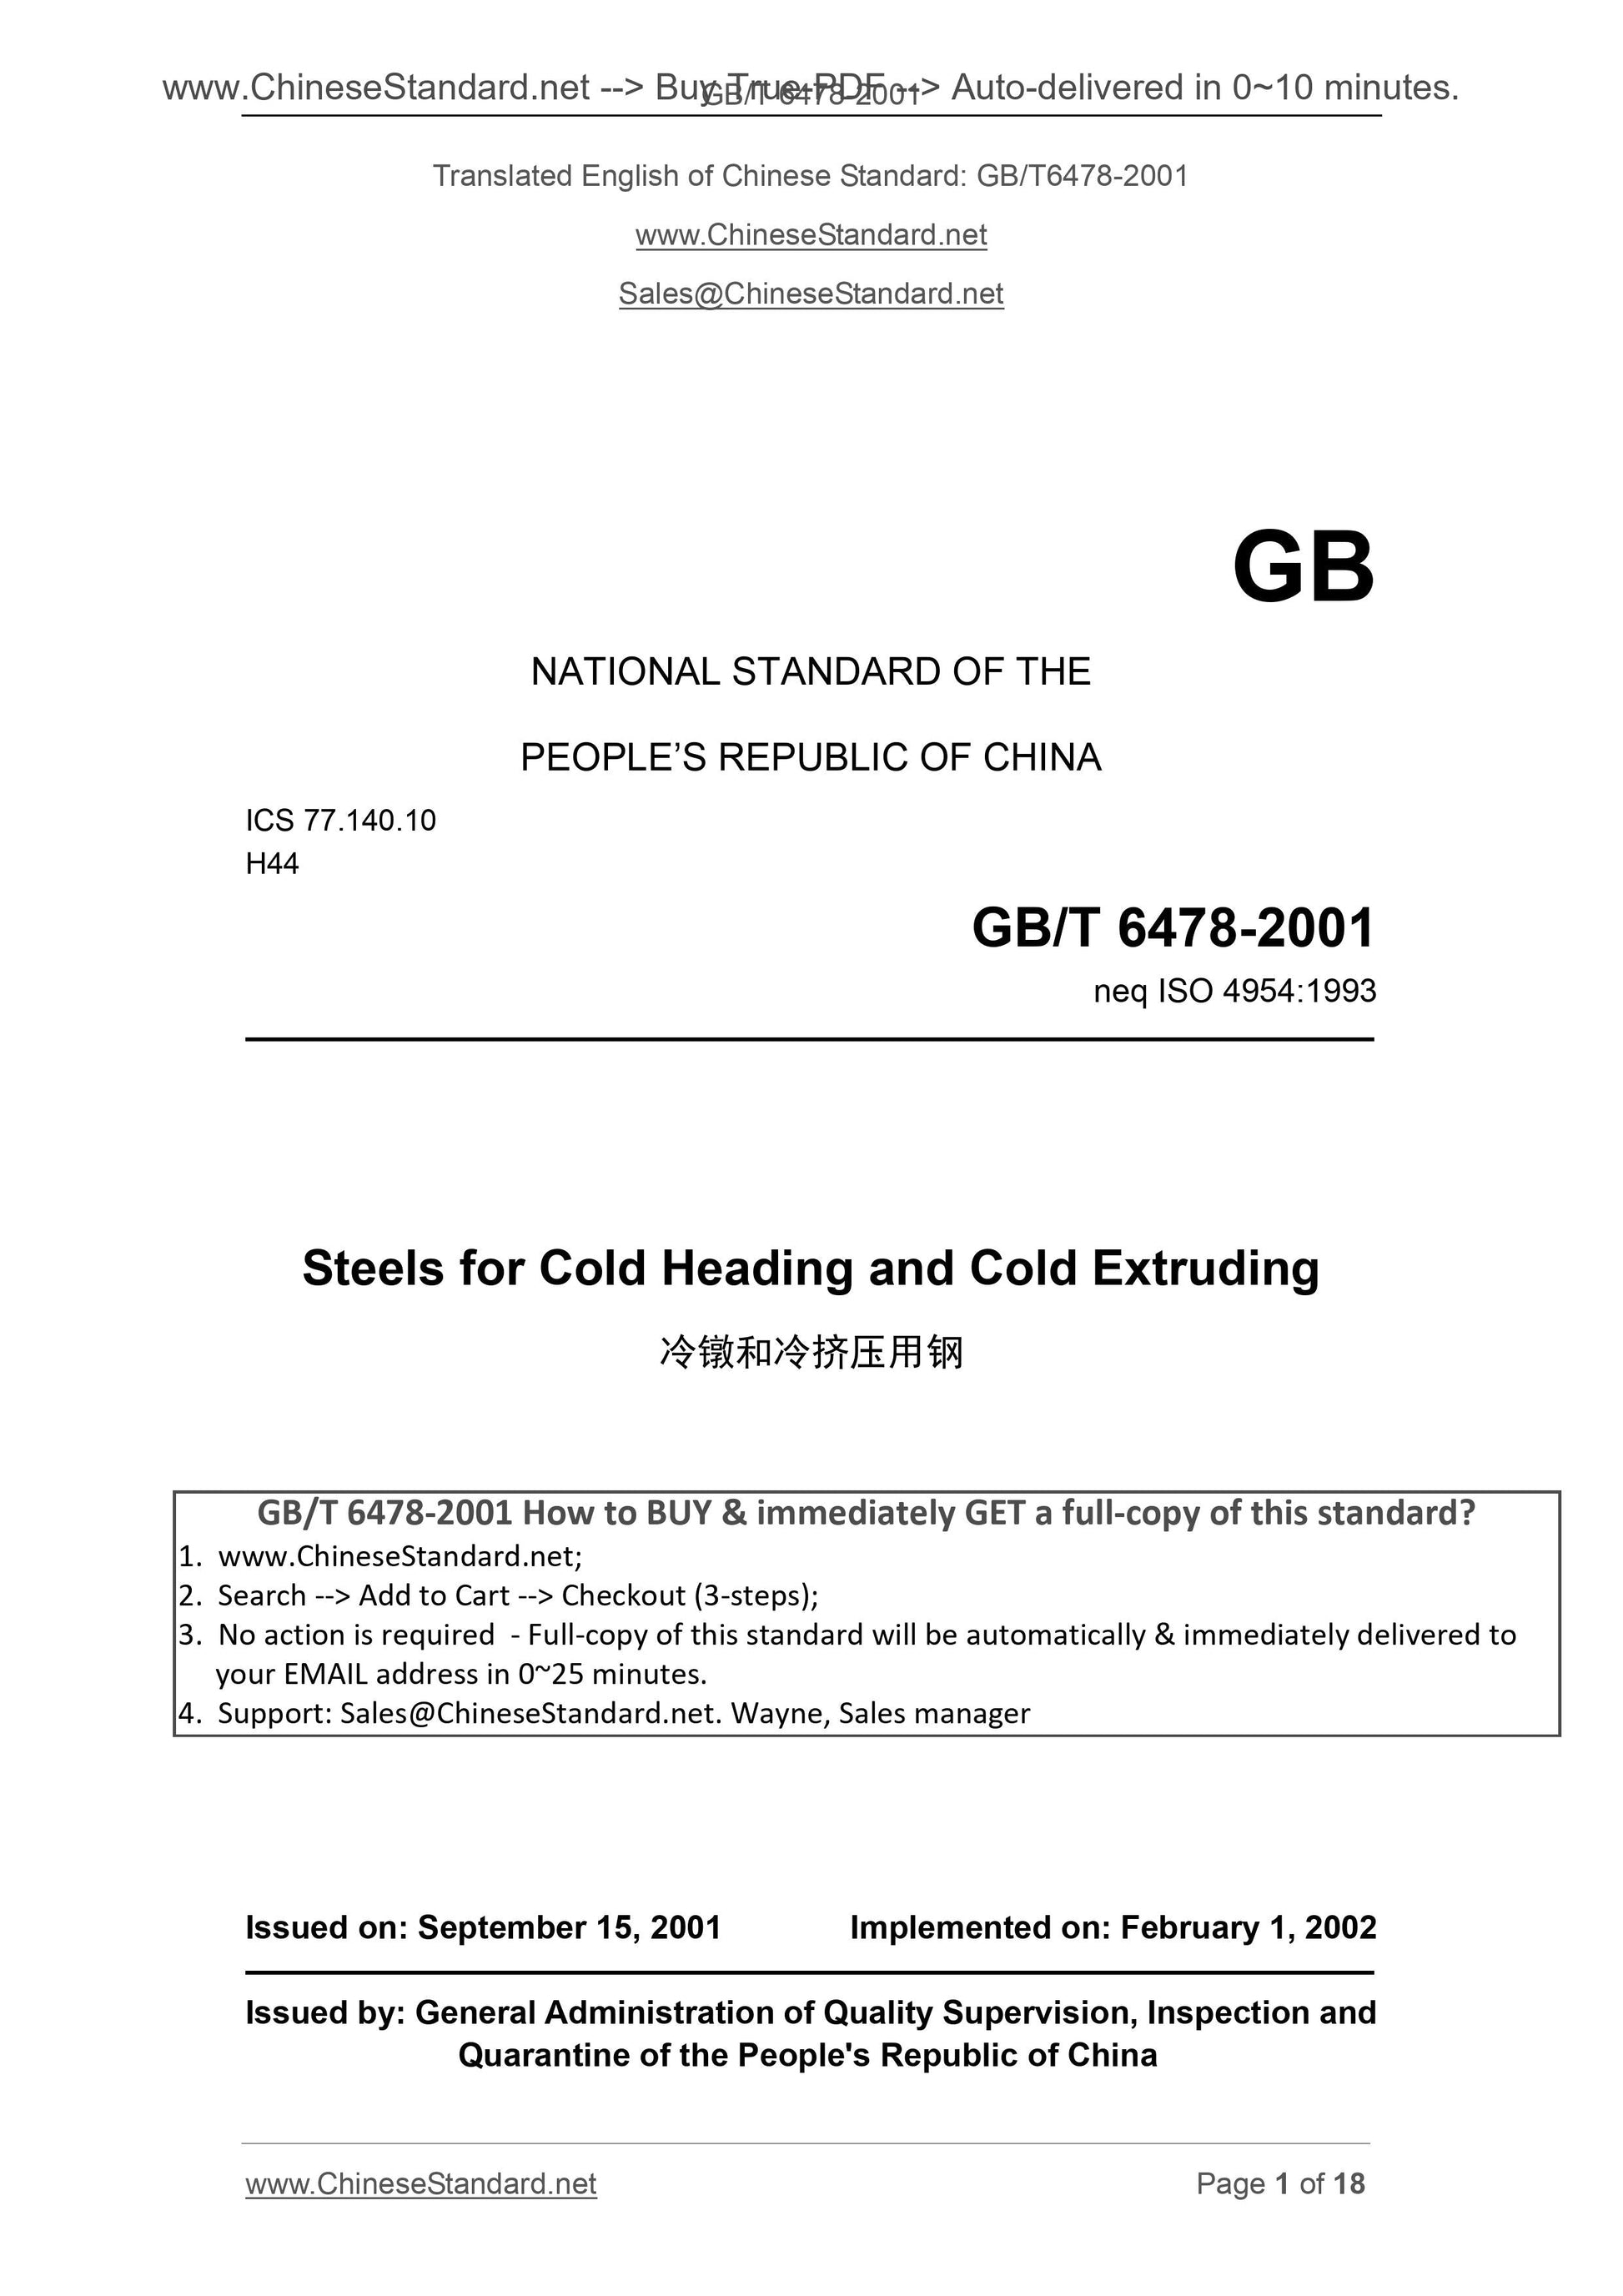 GB/T 6478-2001 Page 1